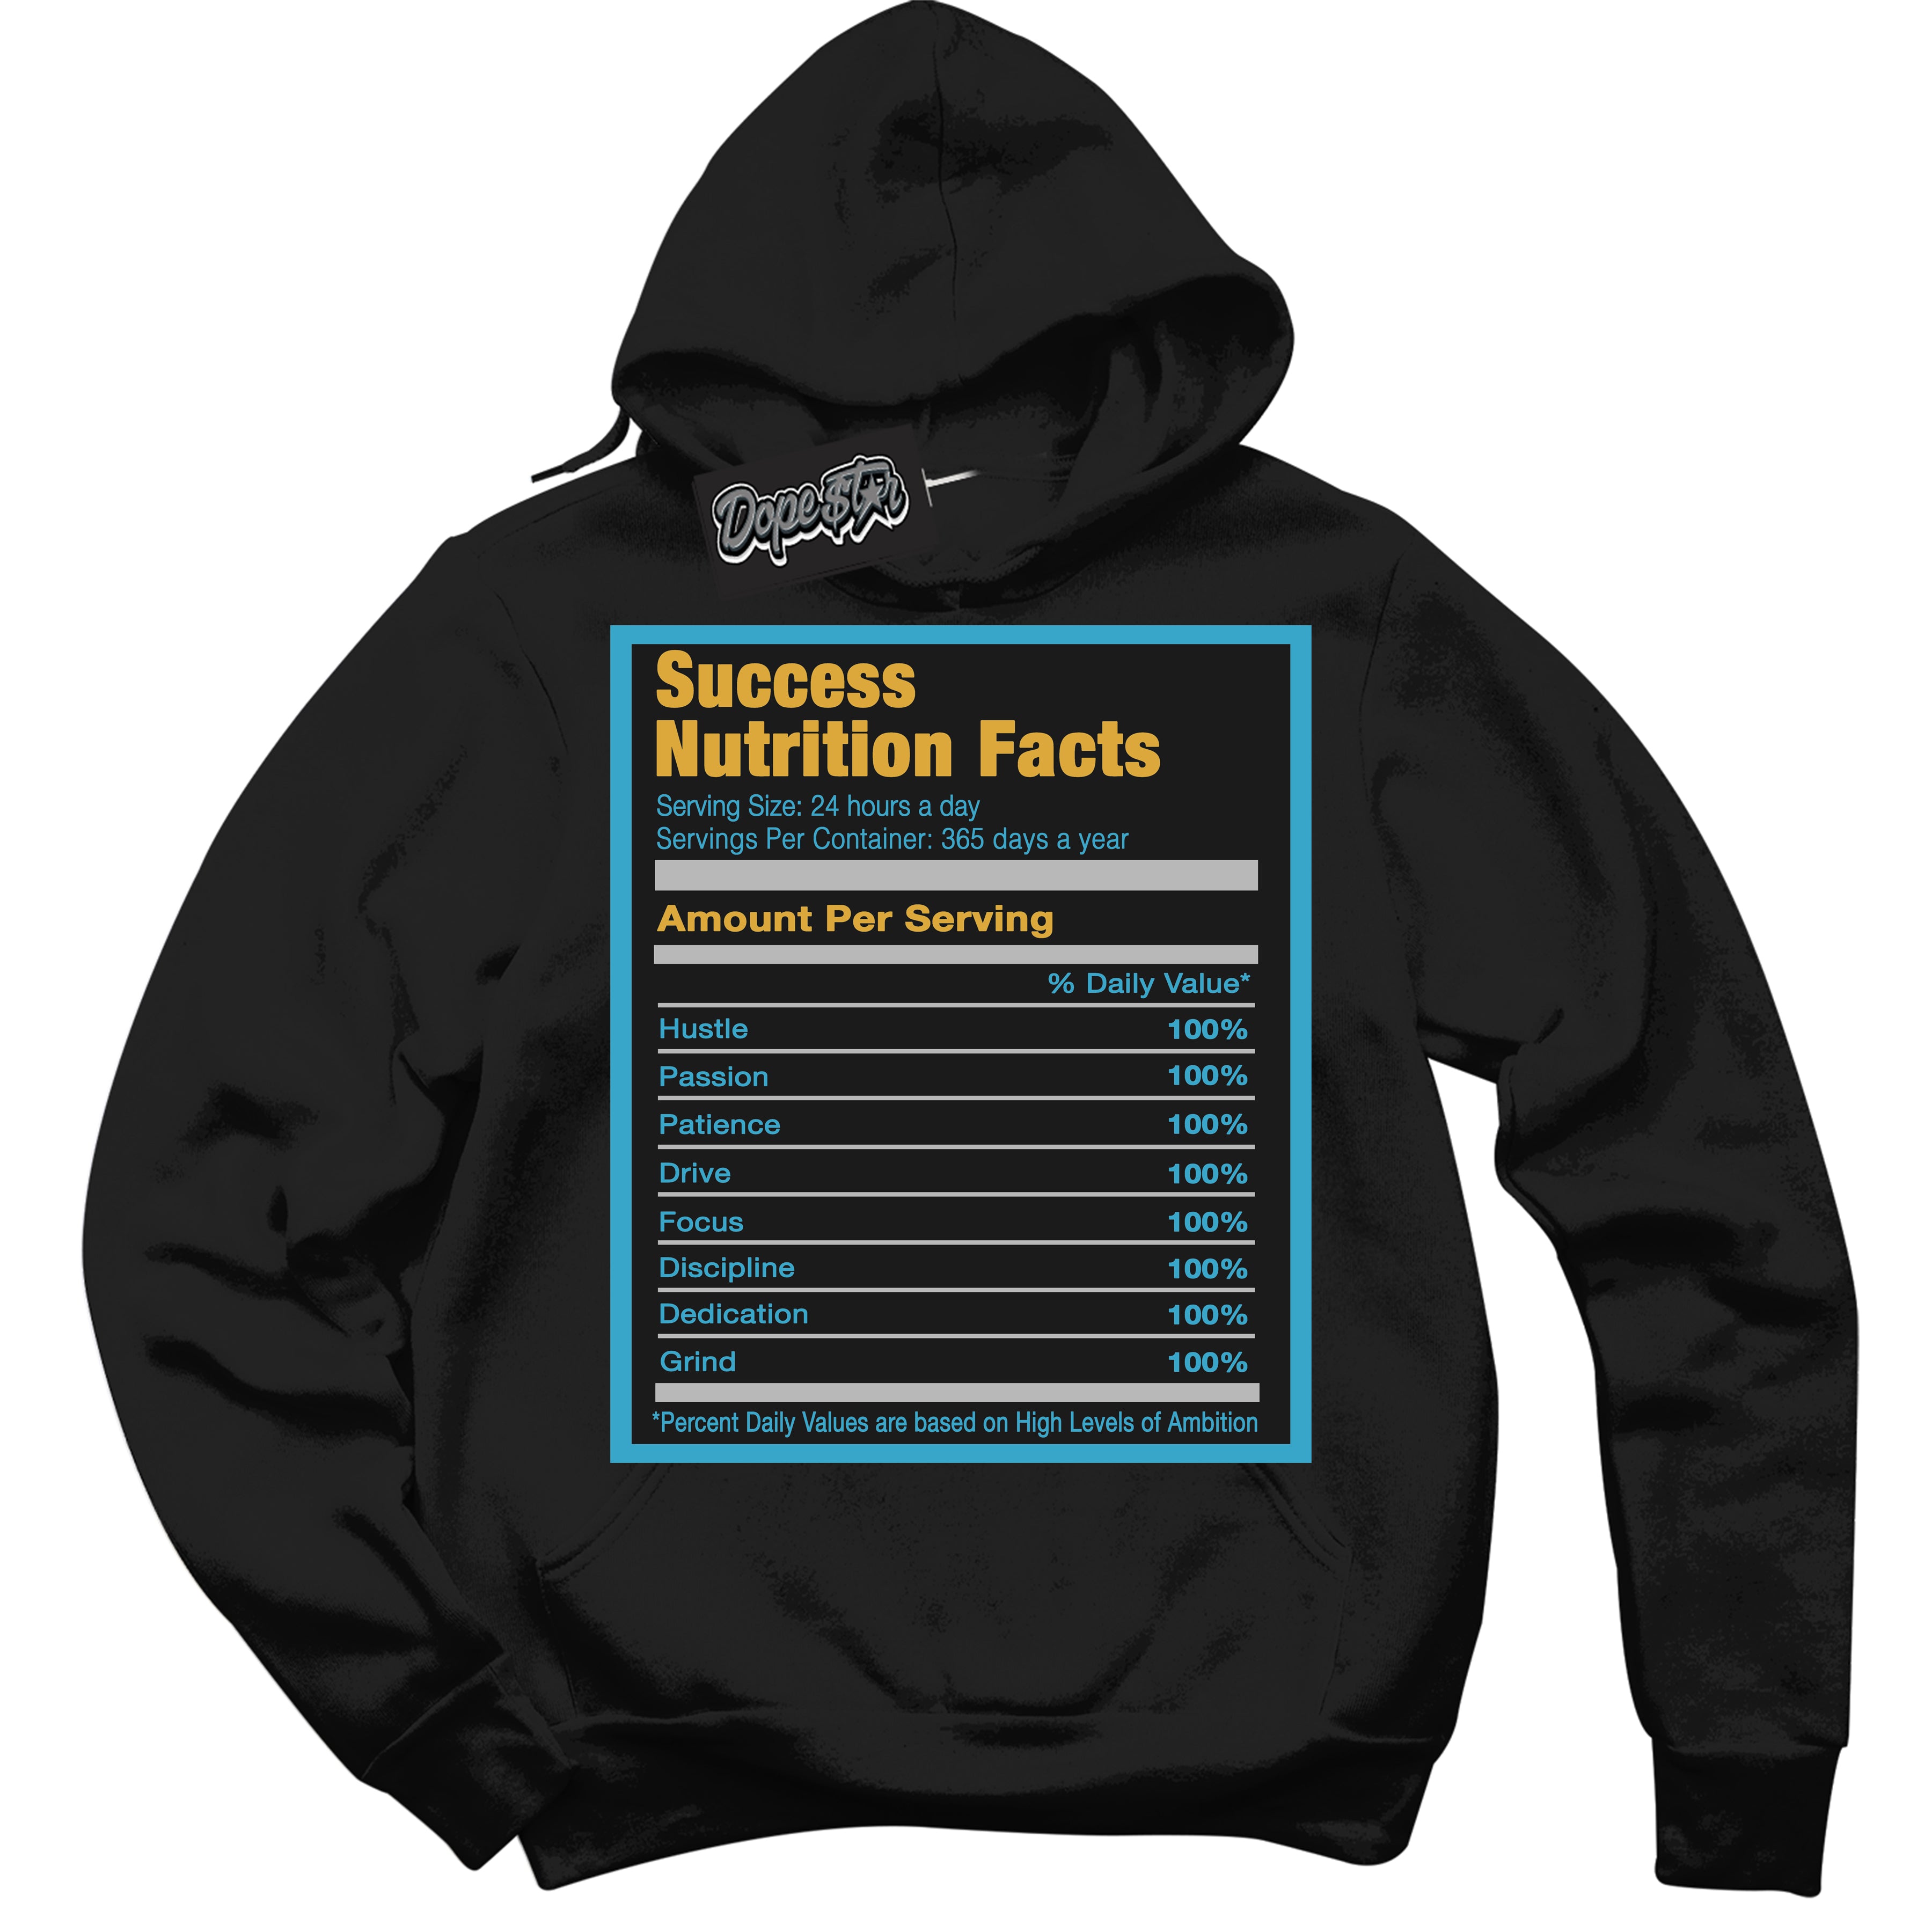 Cool Black Hoodie with “ Success Nutrition ”  design that Perfectly Matches Aqua 5s Sneakers.